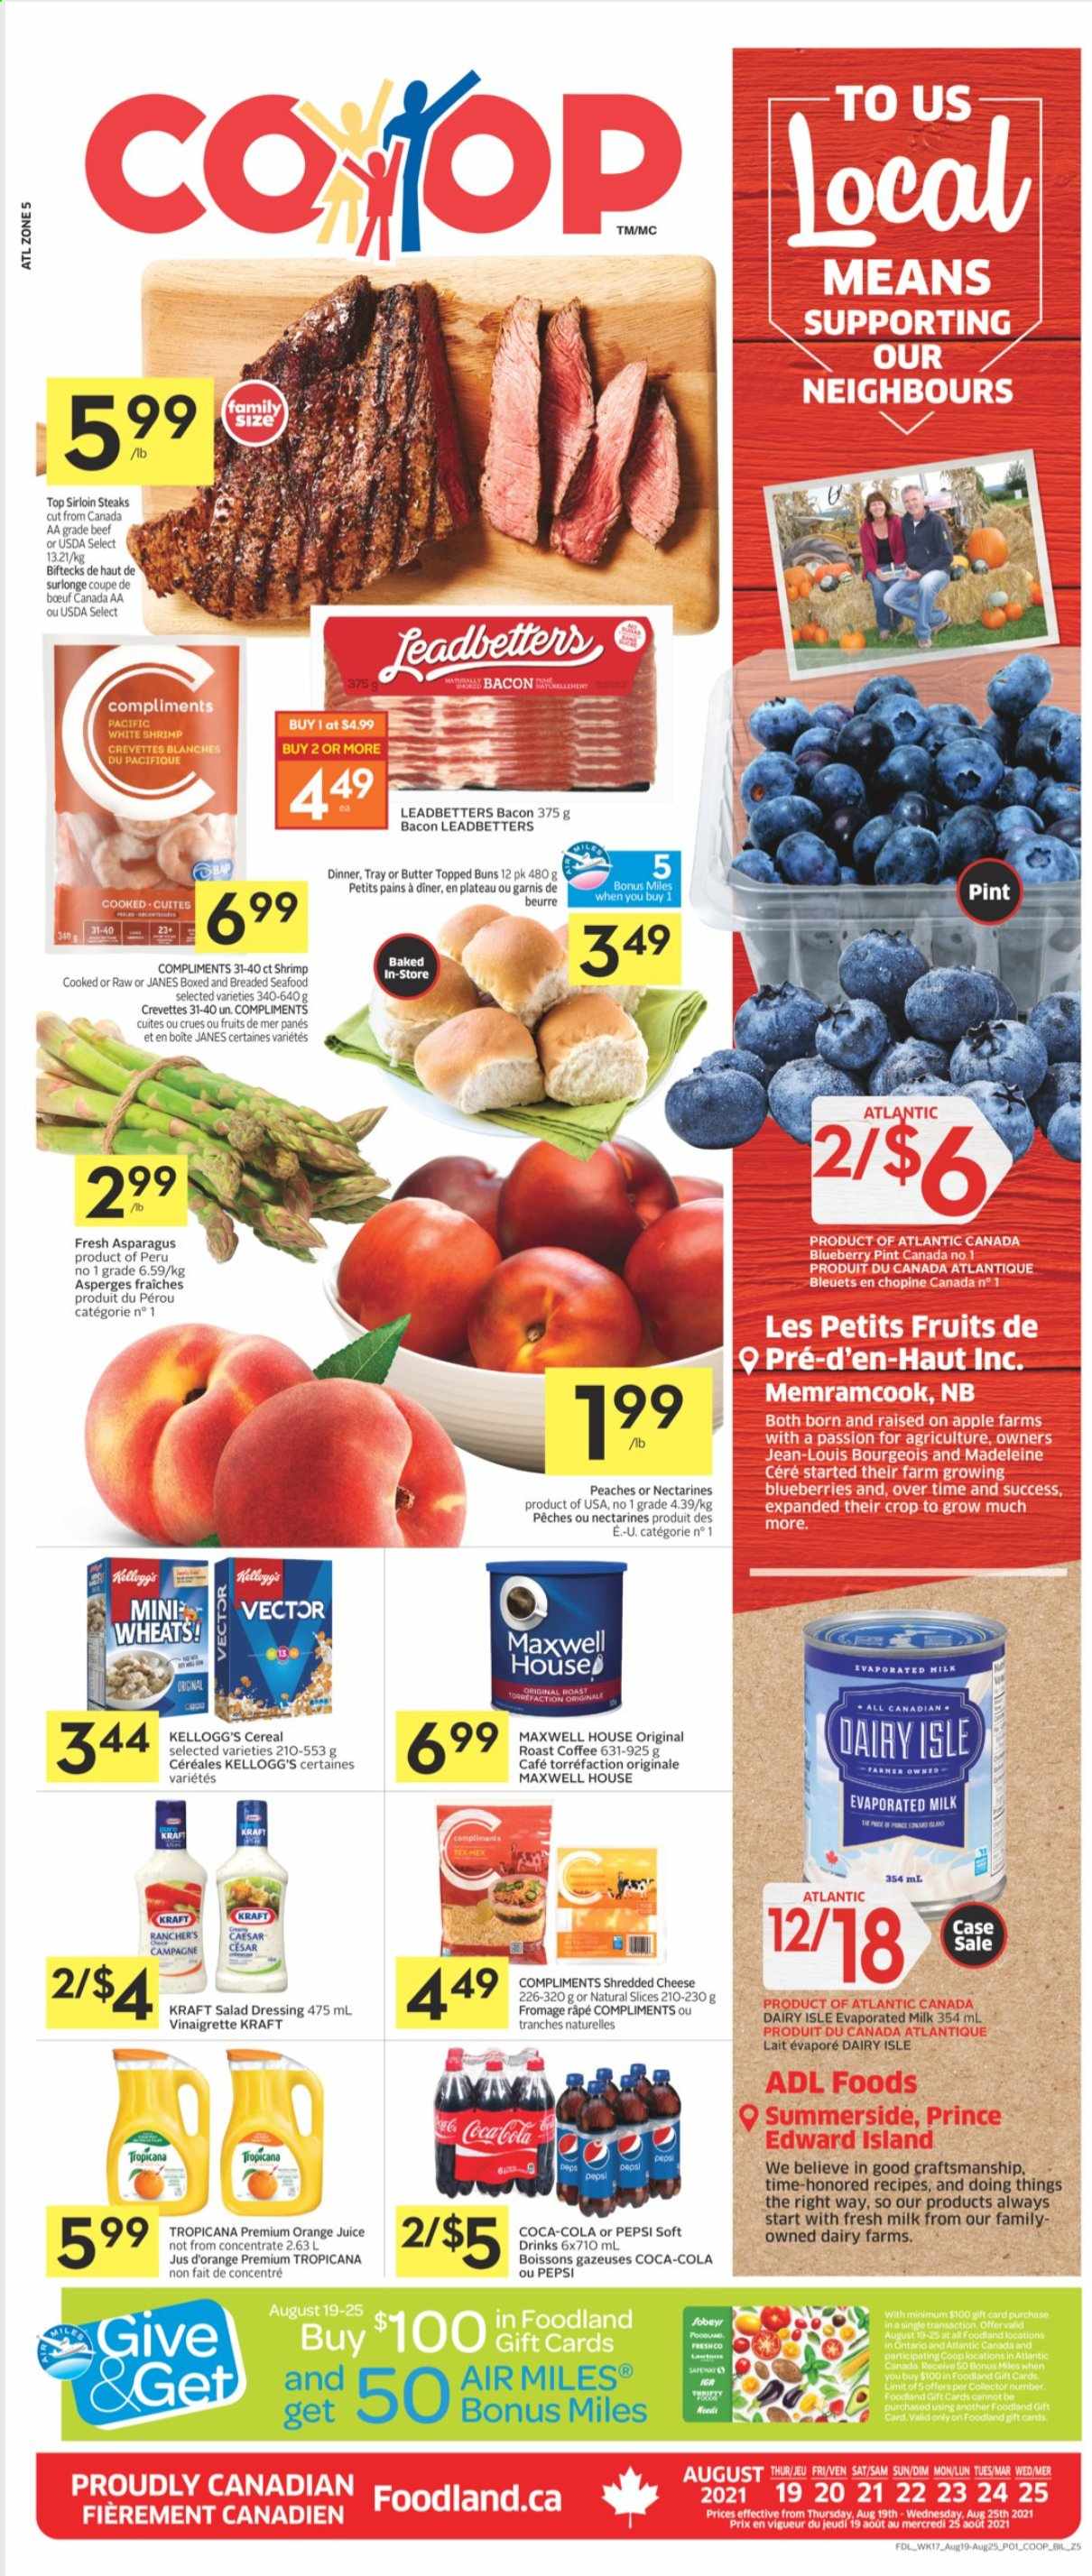 thumbnail - Co-op Flyer - August 19, 2021 - August 25, 2021 - Sales products - buns, asparagus, blueberries, nectarines, peaches, seafood, shrimps, Kraft®, bacon, shredded cheese, evaporated milk, butter, Kellogg's, cereals, salad dressing, vinaigrette dressing, dressing, Coca-Cola, Pepsi, orange juice, juice, soft drink, Maxwell House, coffee, sirloin steak, steak. Page 1.